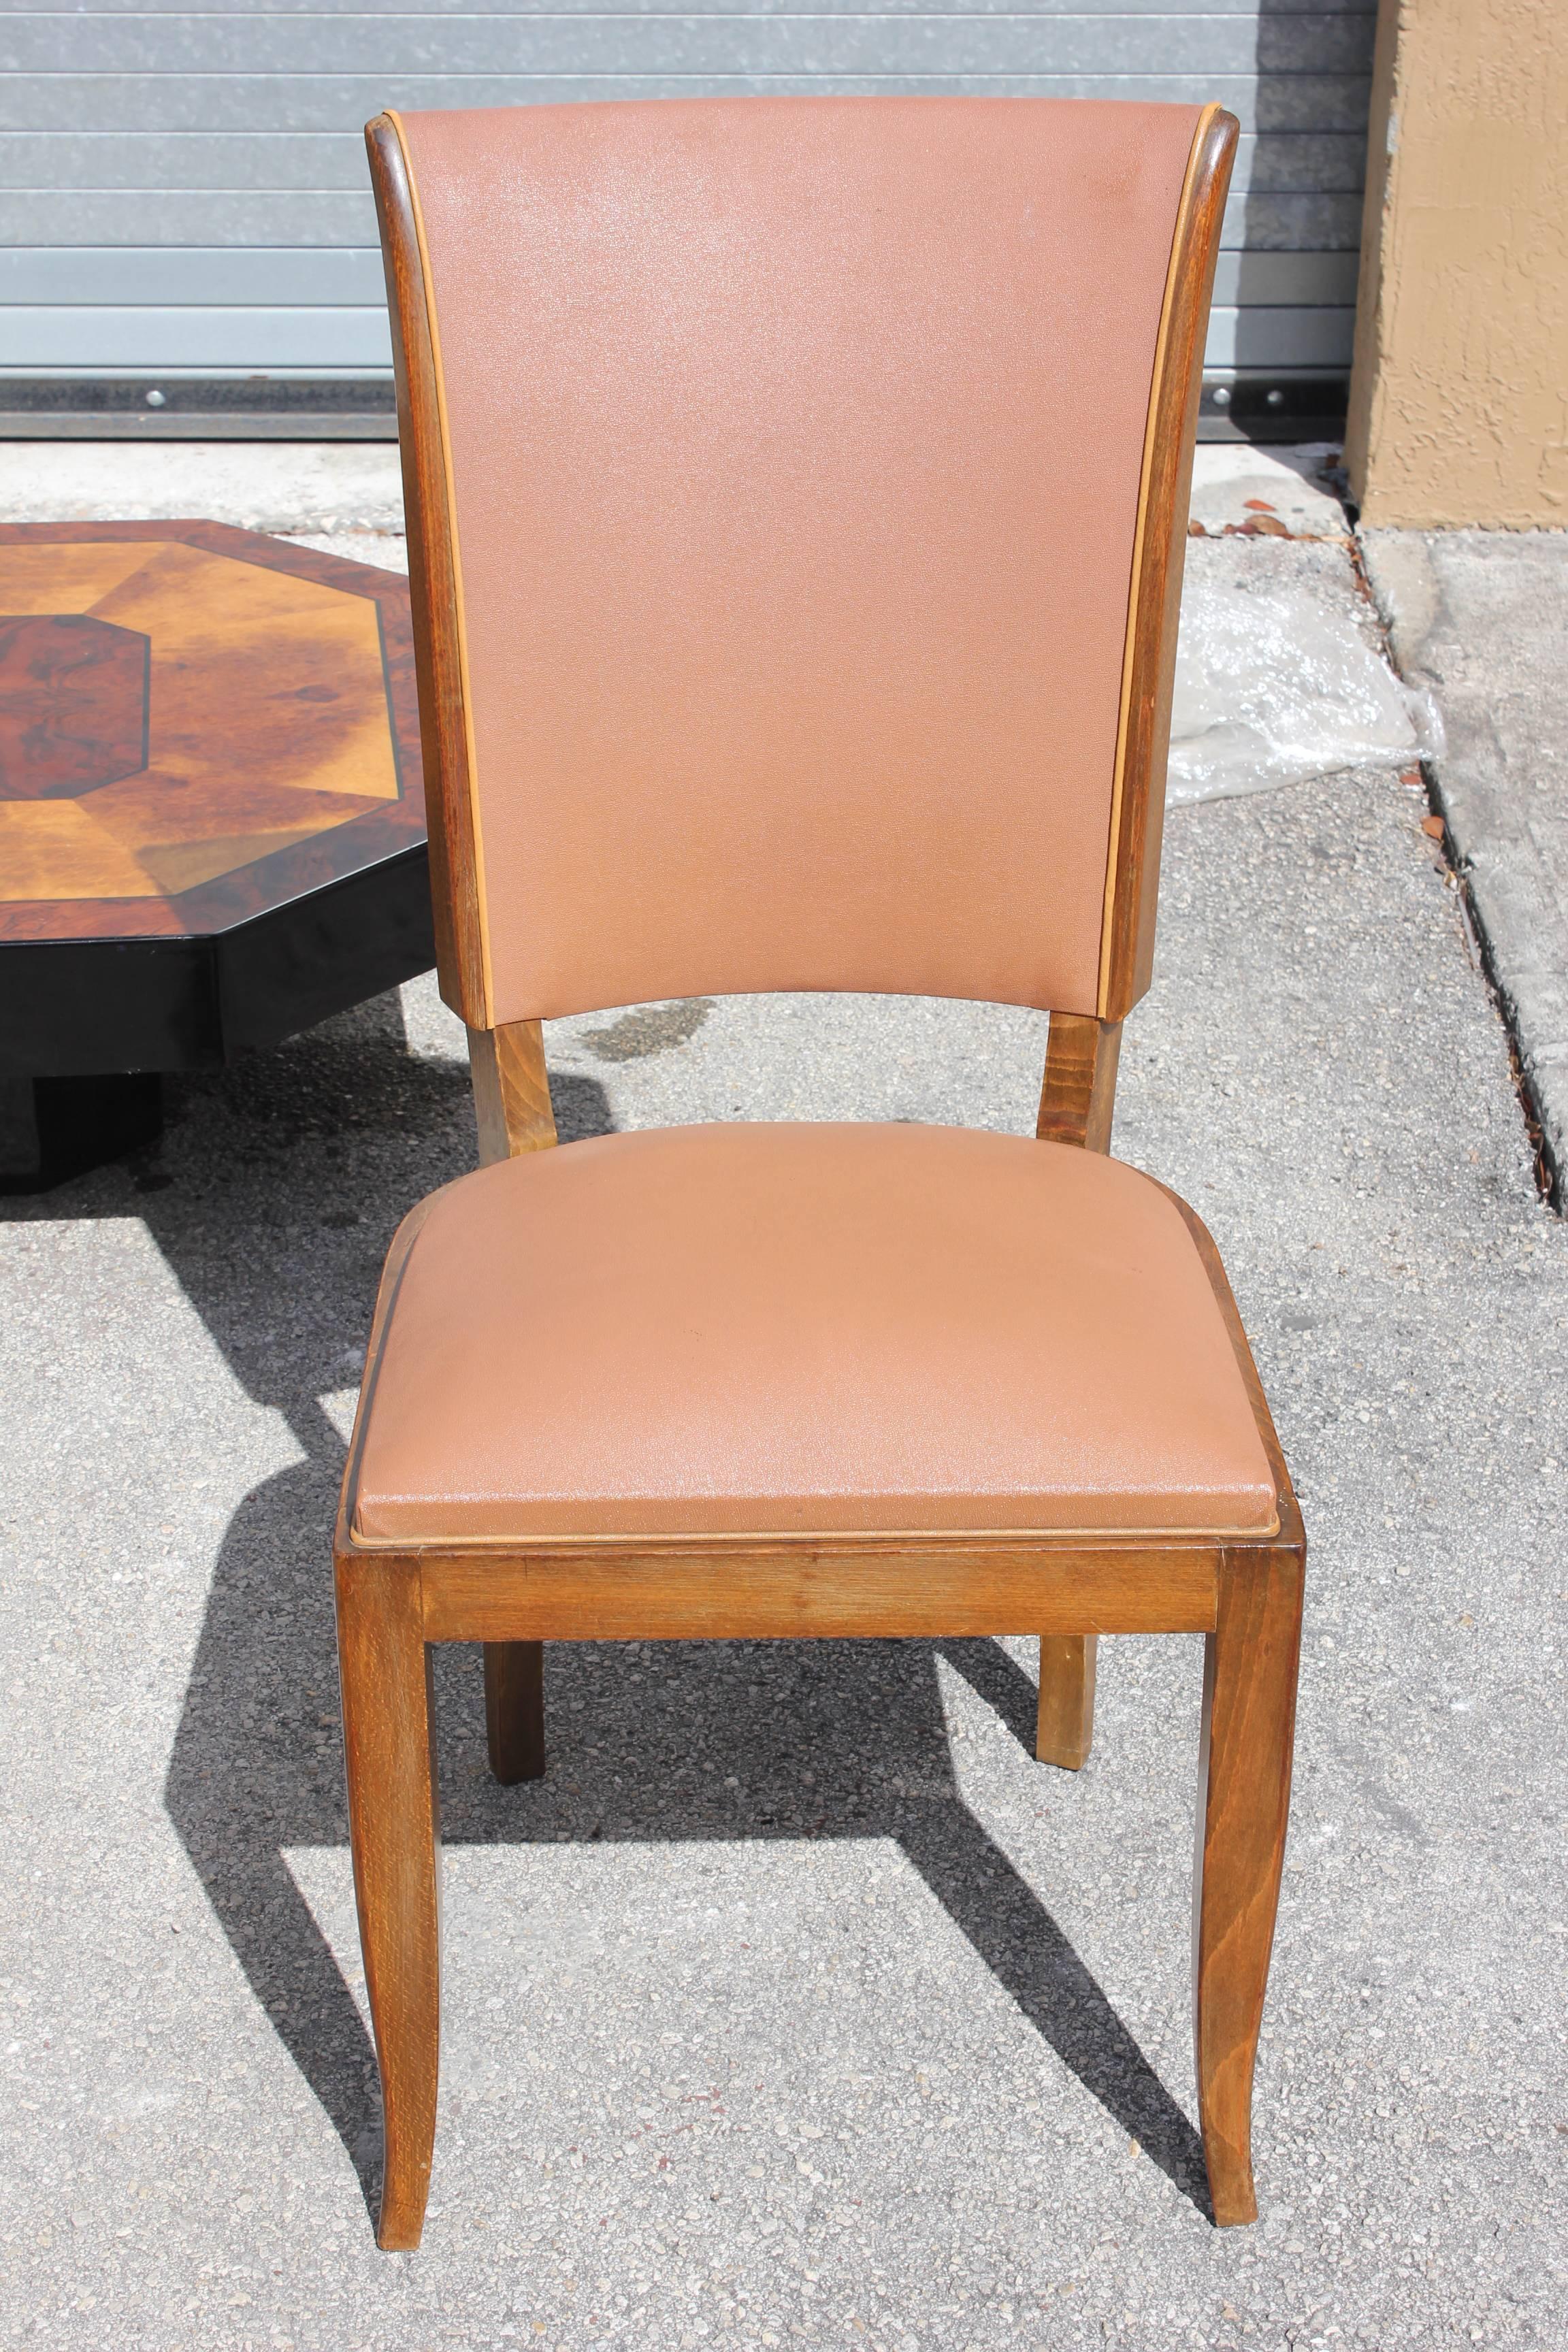 Suite of six French Art Deco Classic mahogany dining chairs, circa 1940s (Re-upholstery need to be changed recommended).